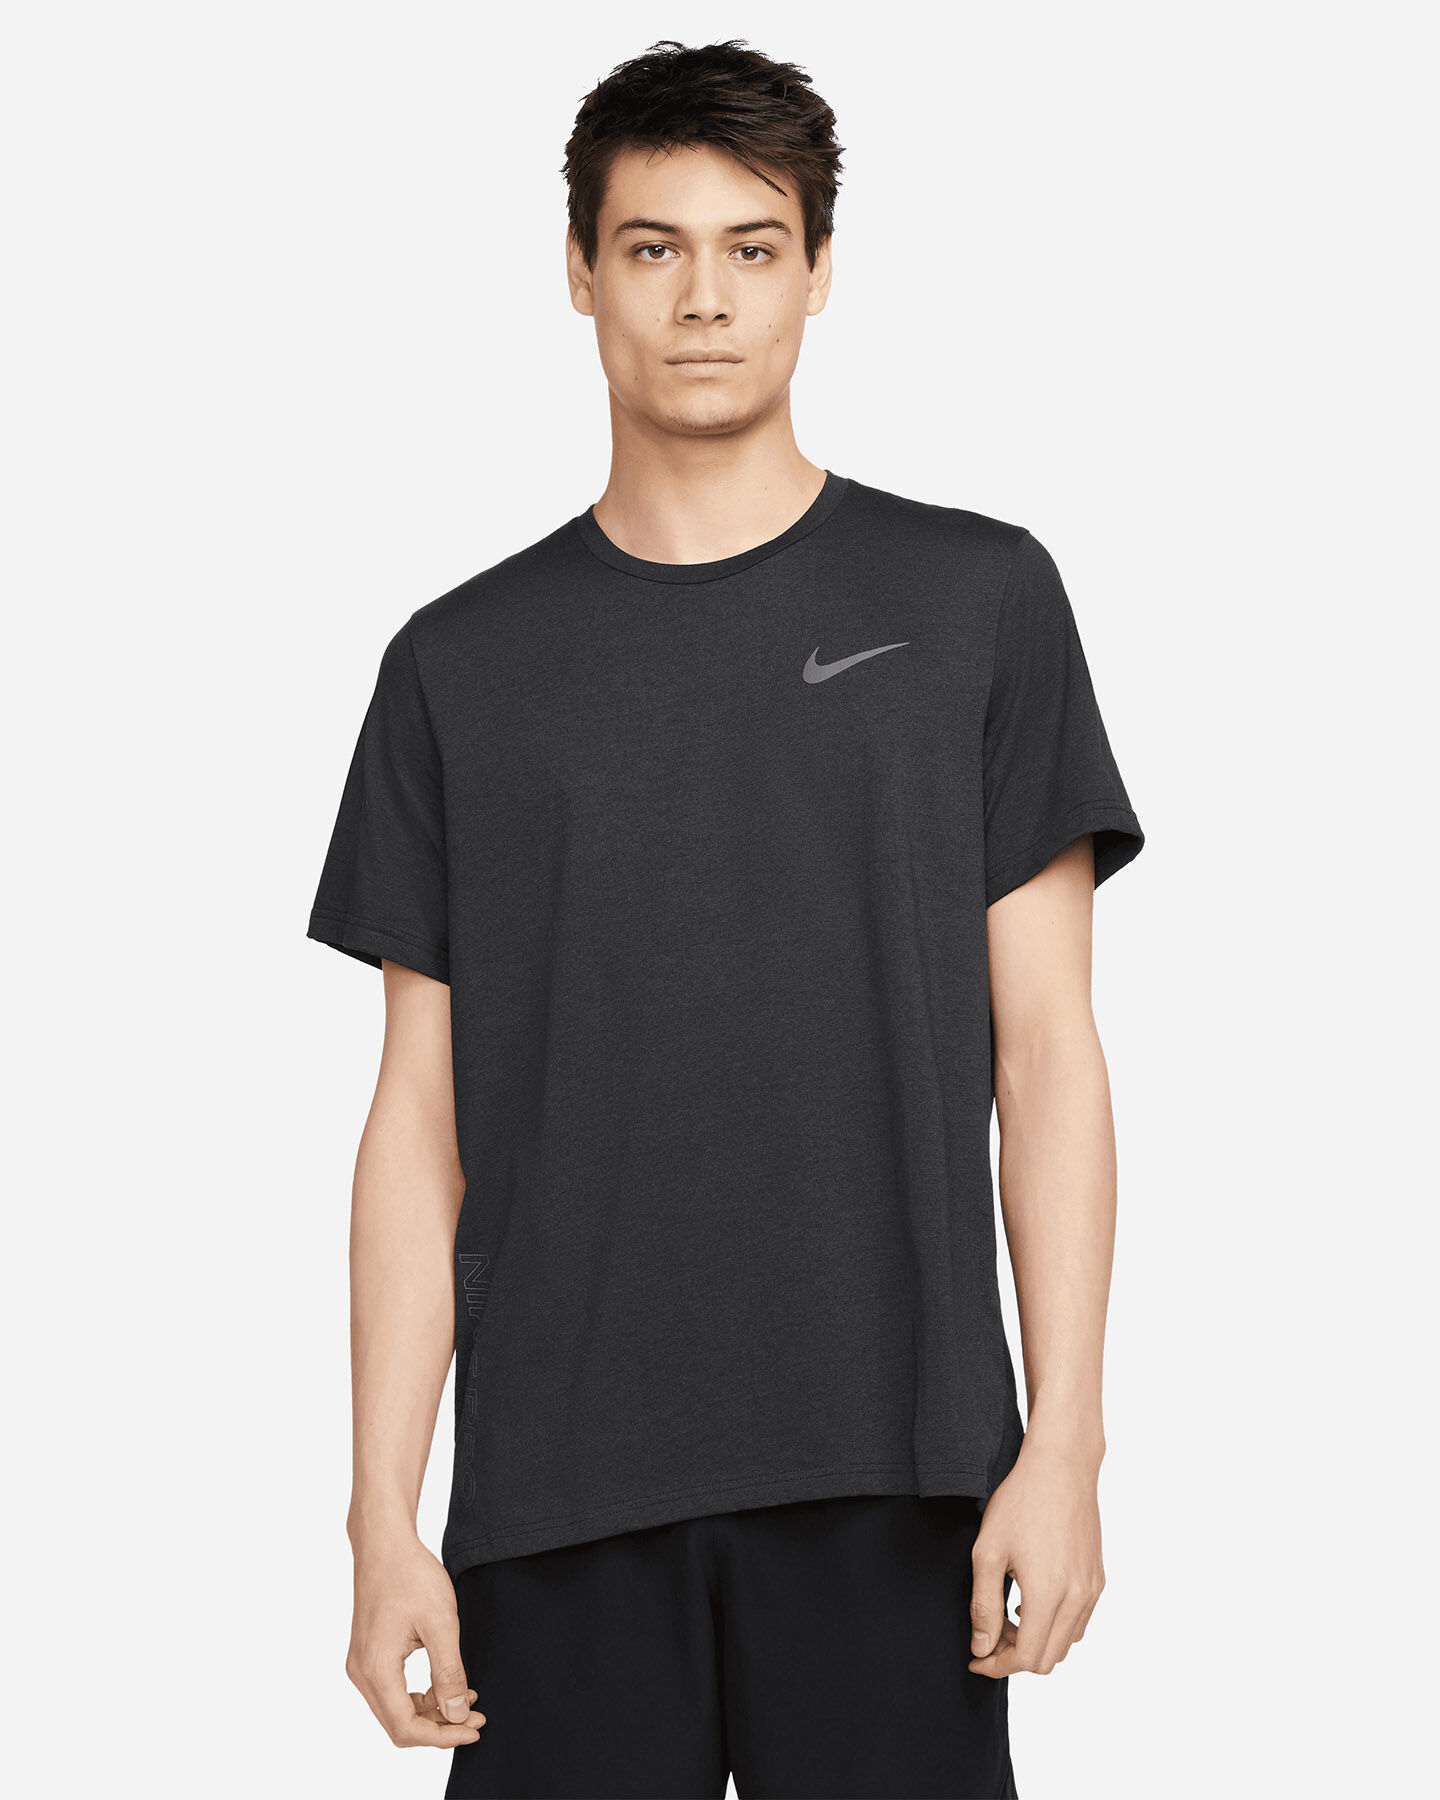  T-Shirt training NIKE NP DF BURNOUT 3.0 M S5492387|638|XL scatto 0